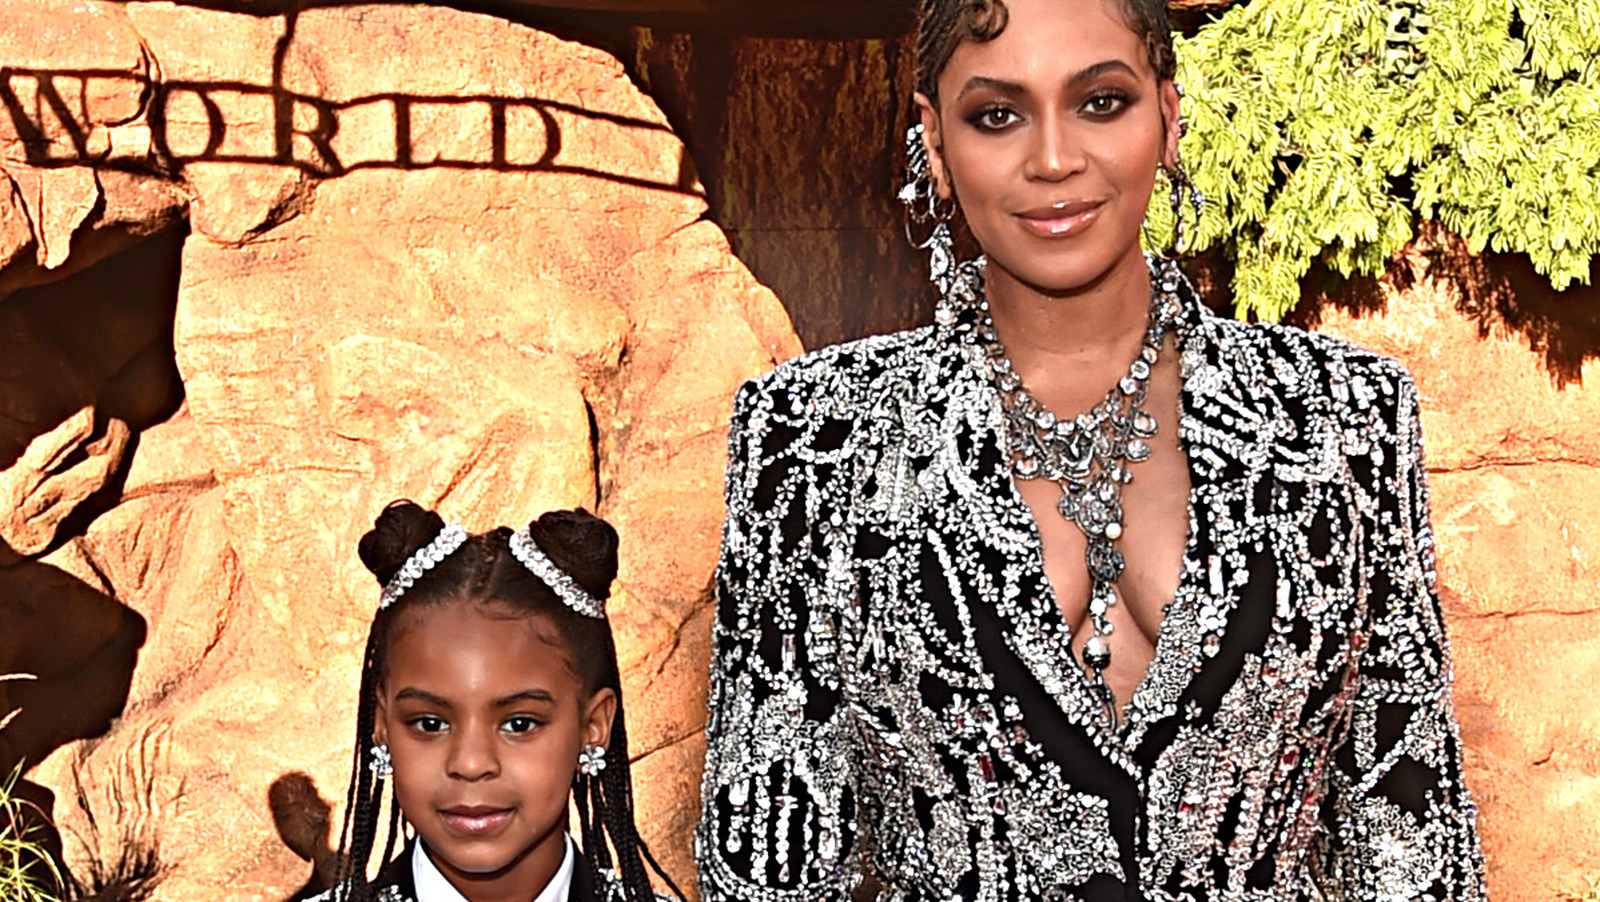 This Singer's Daughter Just Became The SecondYoungest Grammy Winner Ever